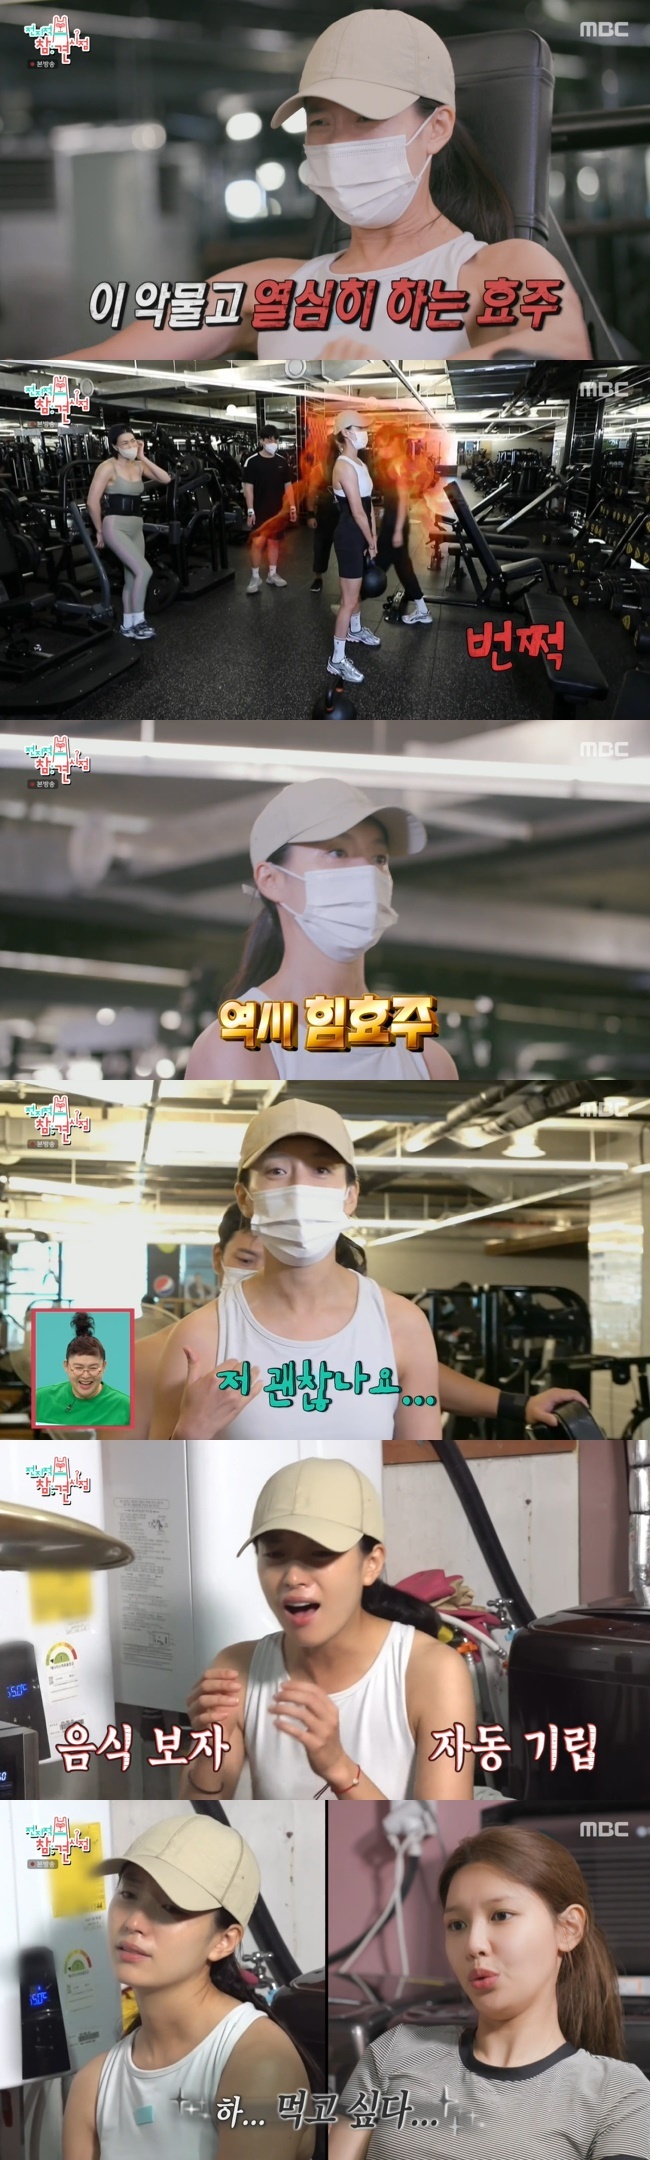 Actor Han Hyo-joo has revealed the power behind his innocent appearance.In MBCs Positive Intervention Point, which aired on September 3, Choi Soo Young was revealed to be Exercise with Jin Seo-yeon and Han Hyo-joo.Choi Soo Young met Exercise mate Han Hyo-joo and Jin Seo-yeon at a fitness center.Sooyoungs sister comes out as a boxing nurse in Tell Me Your Wish, and shes always been taking care of her Exercise because shes going to lose her muscle if she starts Exercise and doesnt Exercise, said Manager.With the introduction of Jin Seo-yeon, he started Exercise with director Yang Chi-seong, and Han Hyo-joo, who later appeared in the movie Believer 2, joined Exercise Mait.When Han Hyo-joo was revealed to be Exercise, the performers were surprised that this was a muscle.Lee Young-ja also said, I did not know that Han Hyo-joo was exercising like this.Choi Soo Young said, I am shooting a movie Believer 2 these days, and I am preparing hard to be a character who plays an action act called a big knife.Han Hyo-joo listened to 44kg and 52kg kettlebell.Surprised by the power of Han Hyo-joo, Choi Soo Young was embarrassed by Is not it crazy? Han Hyo-joo said, Is the image okay?Its not like this.After Exercise, the three went to the laundry room of the centre for a meal.When Tteok-bokki, created by Yang Chi-seong, was released, Han Hyo-joo lost Reason and automatically stood up.Han Hyo-joo said, I am going to make fun of you again.I was frustrated by shouting, and tried to eat Chicken bread in soup, but I was disappointed to be discovered by Yang Chi-seong.